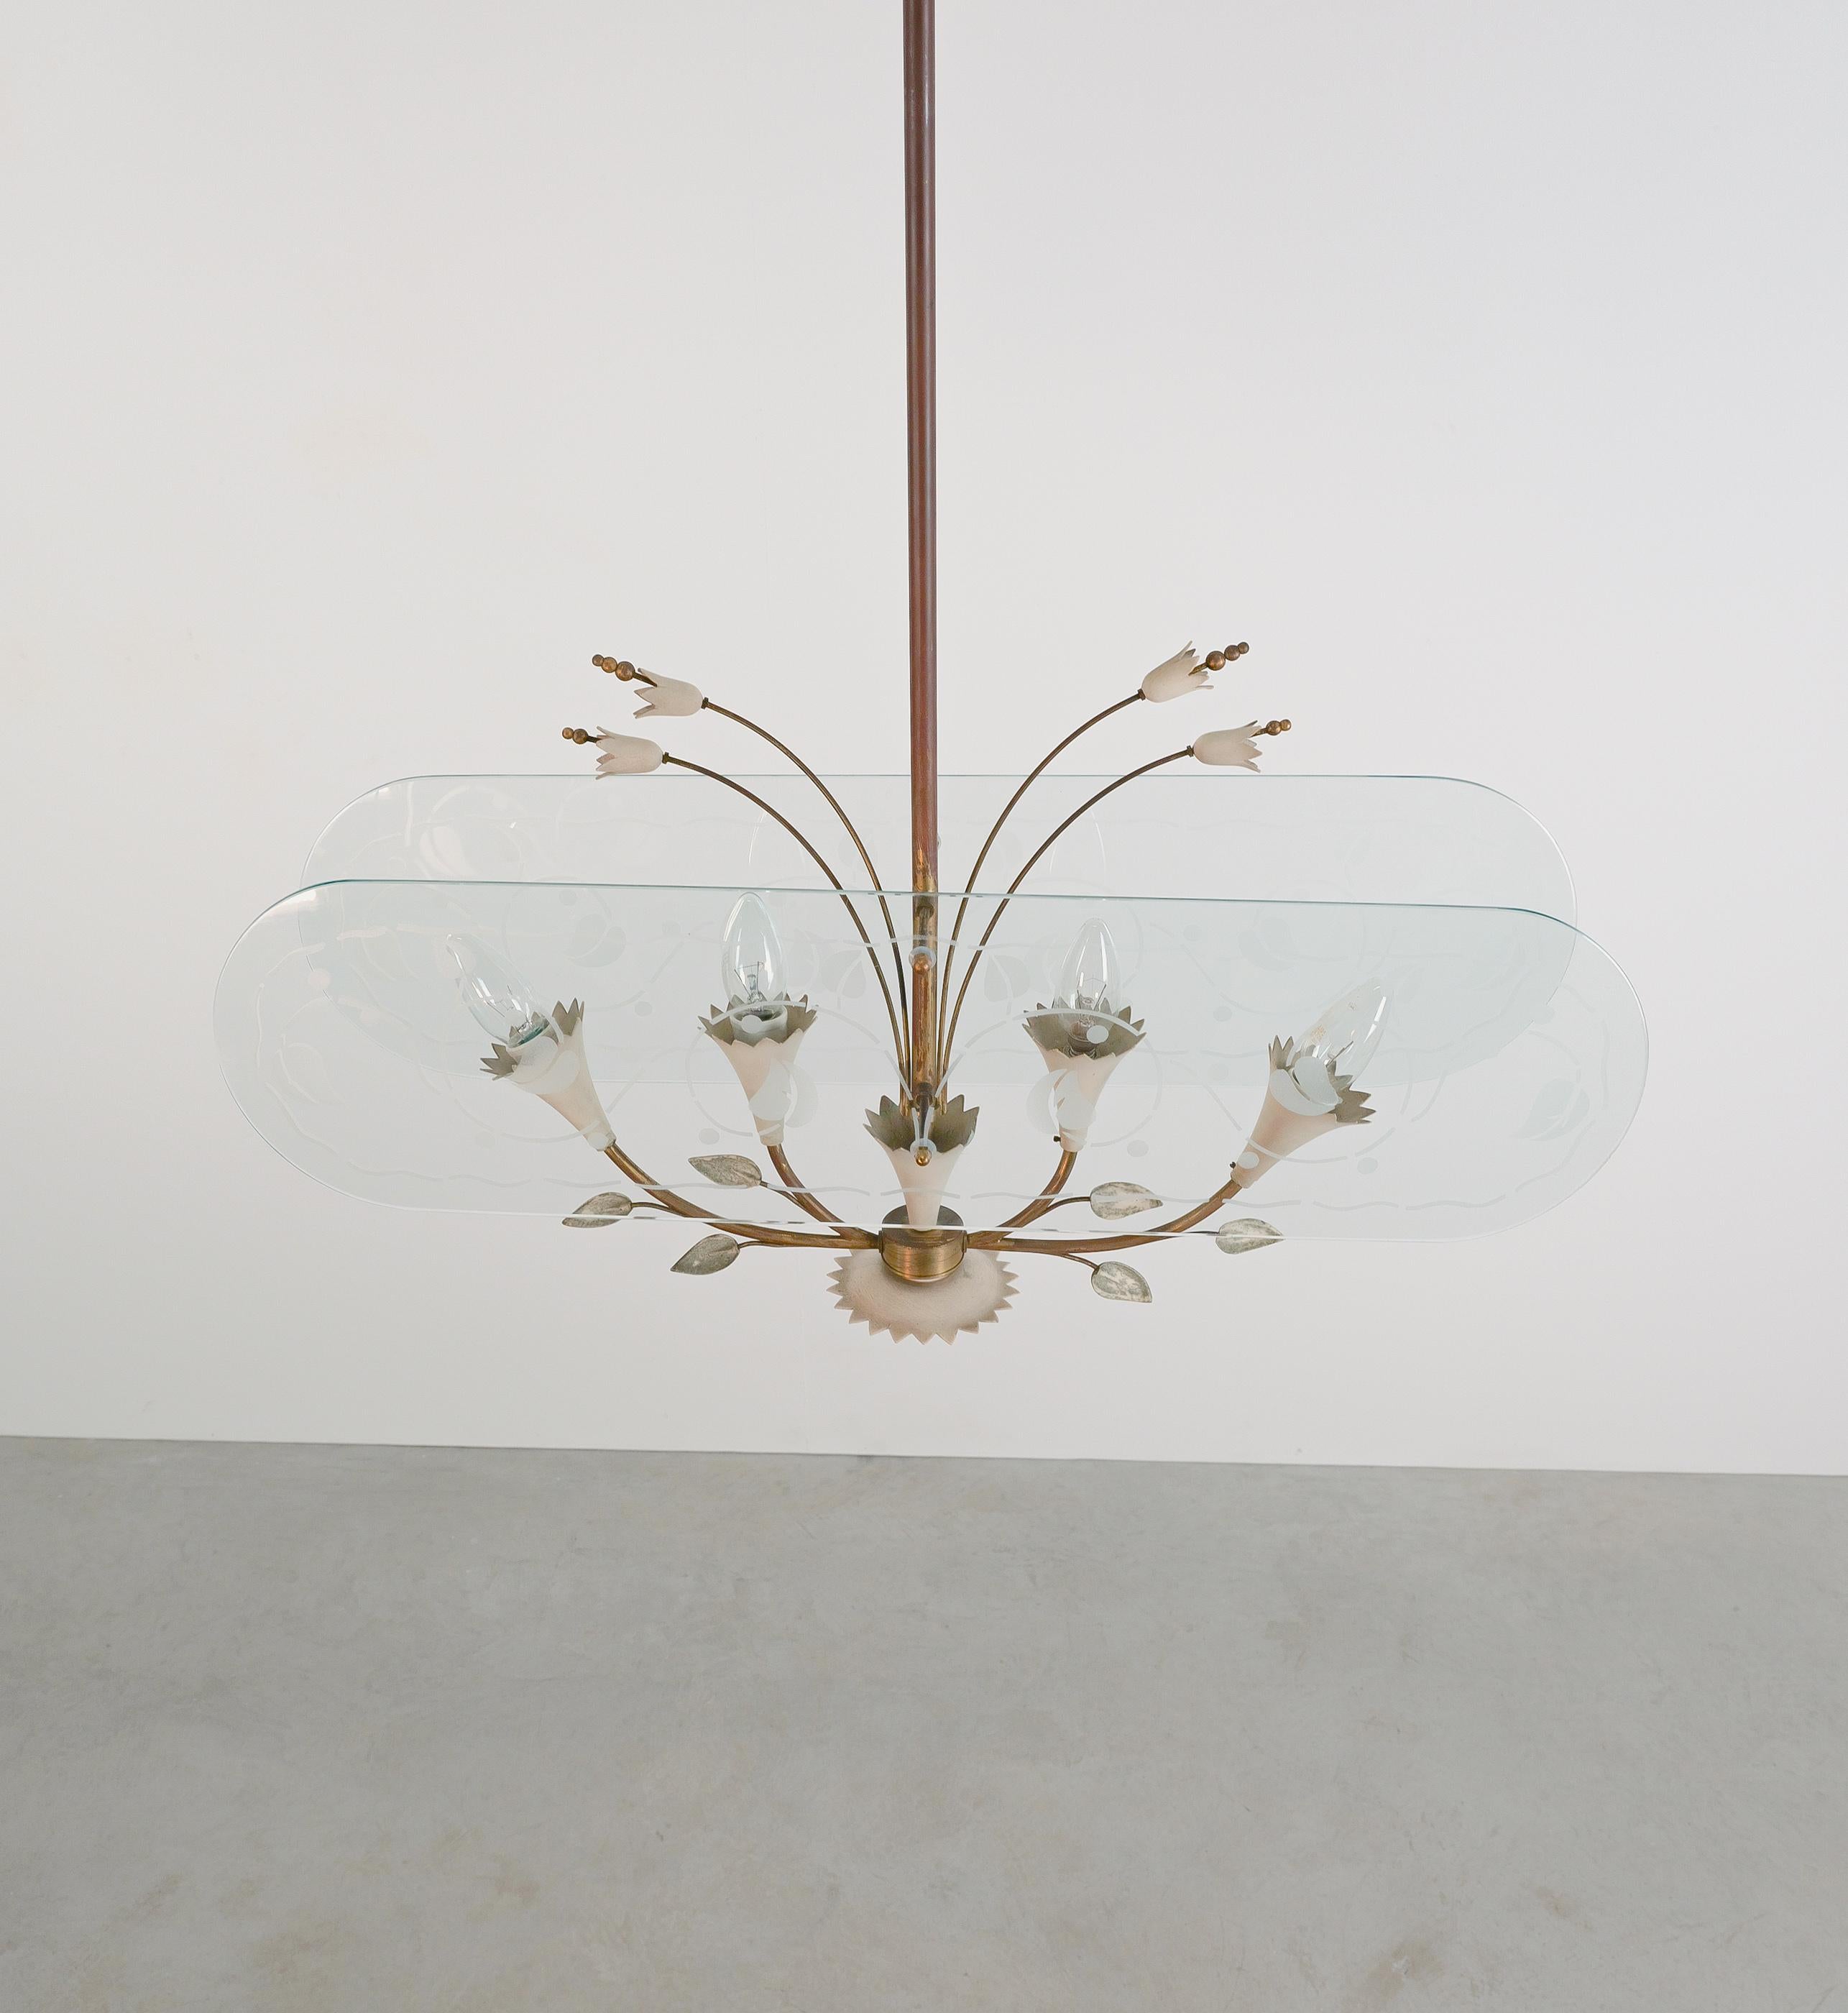 Pietro Chiesa Chandelier Floral Glass with Etched Details Italy, 1950 In Good Condition For Sale In Vienna, AT